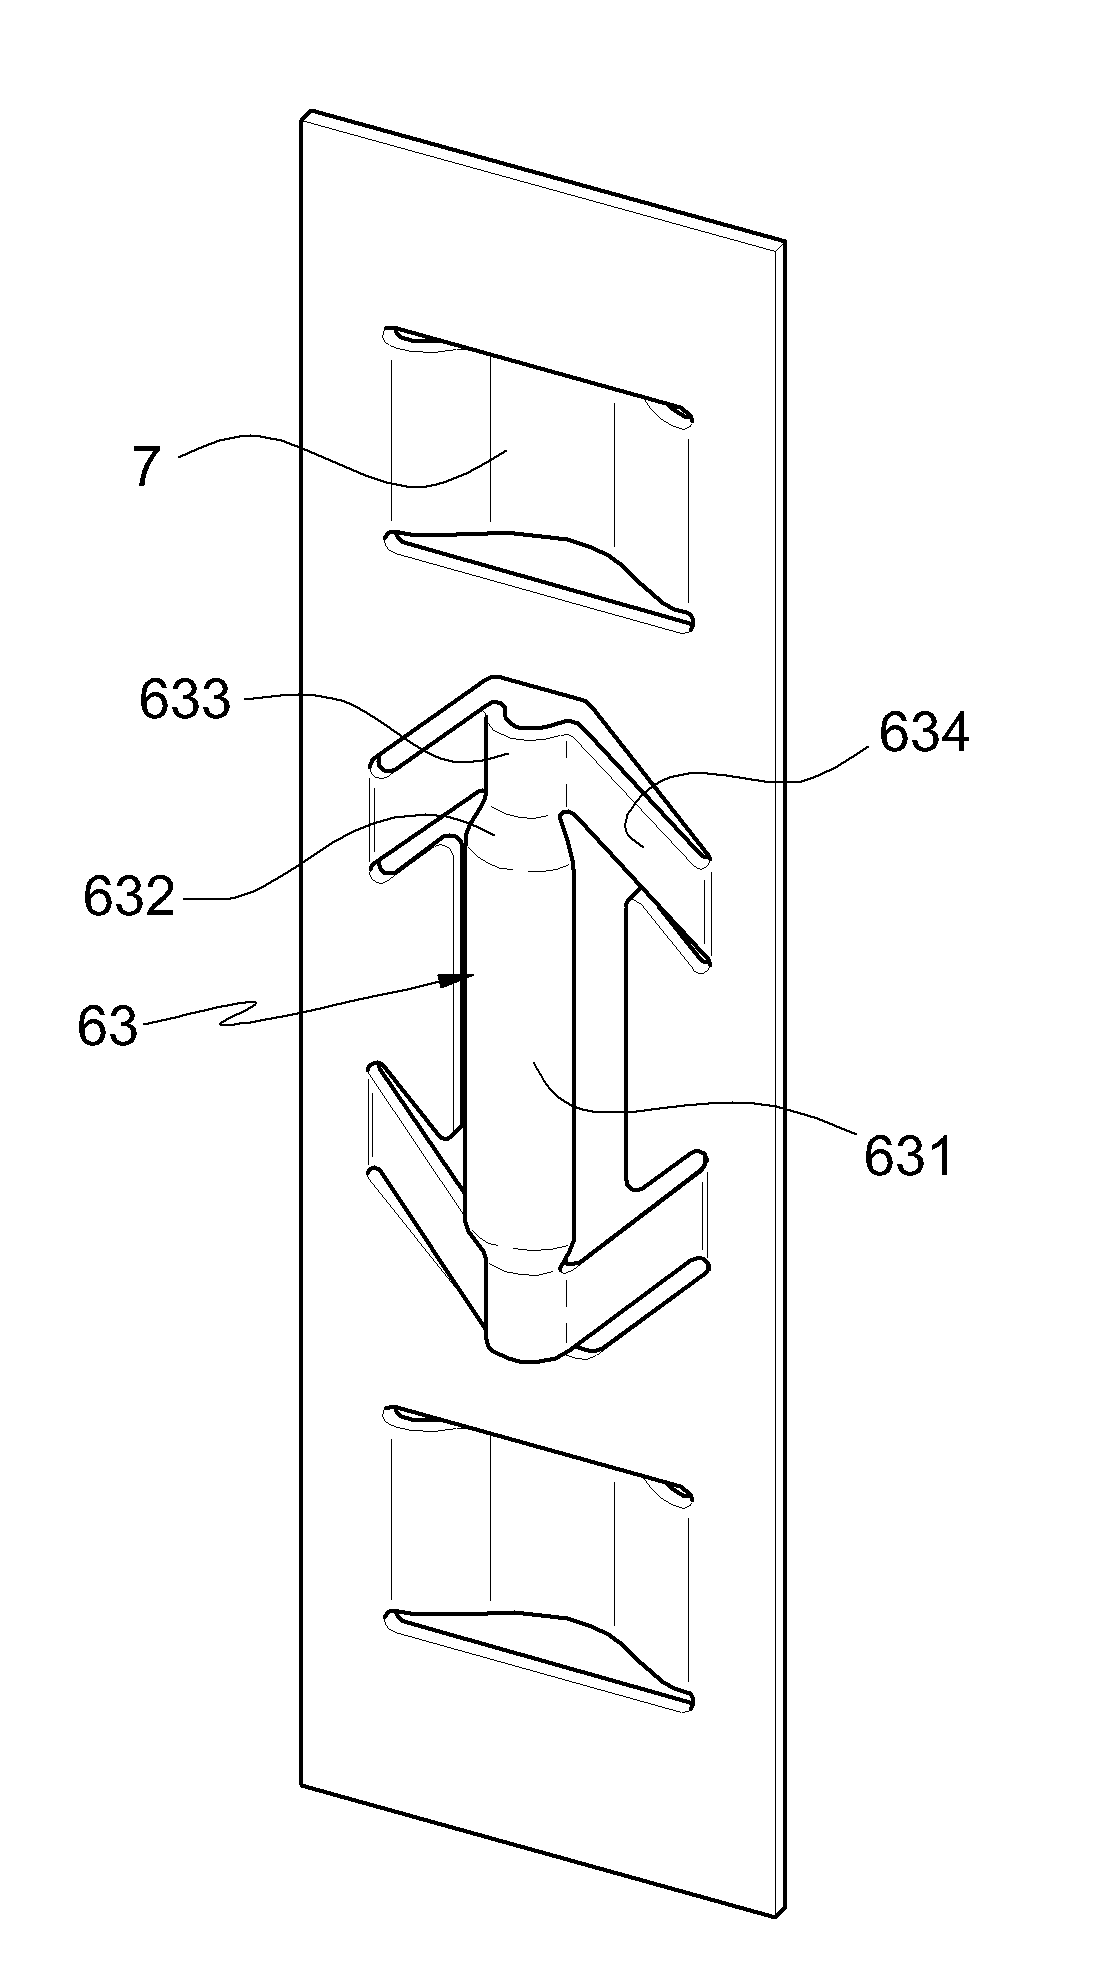 Anti-fretting wear spacer grid with canoe-shaped spring